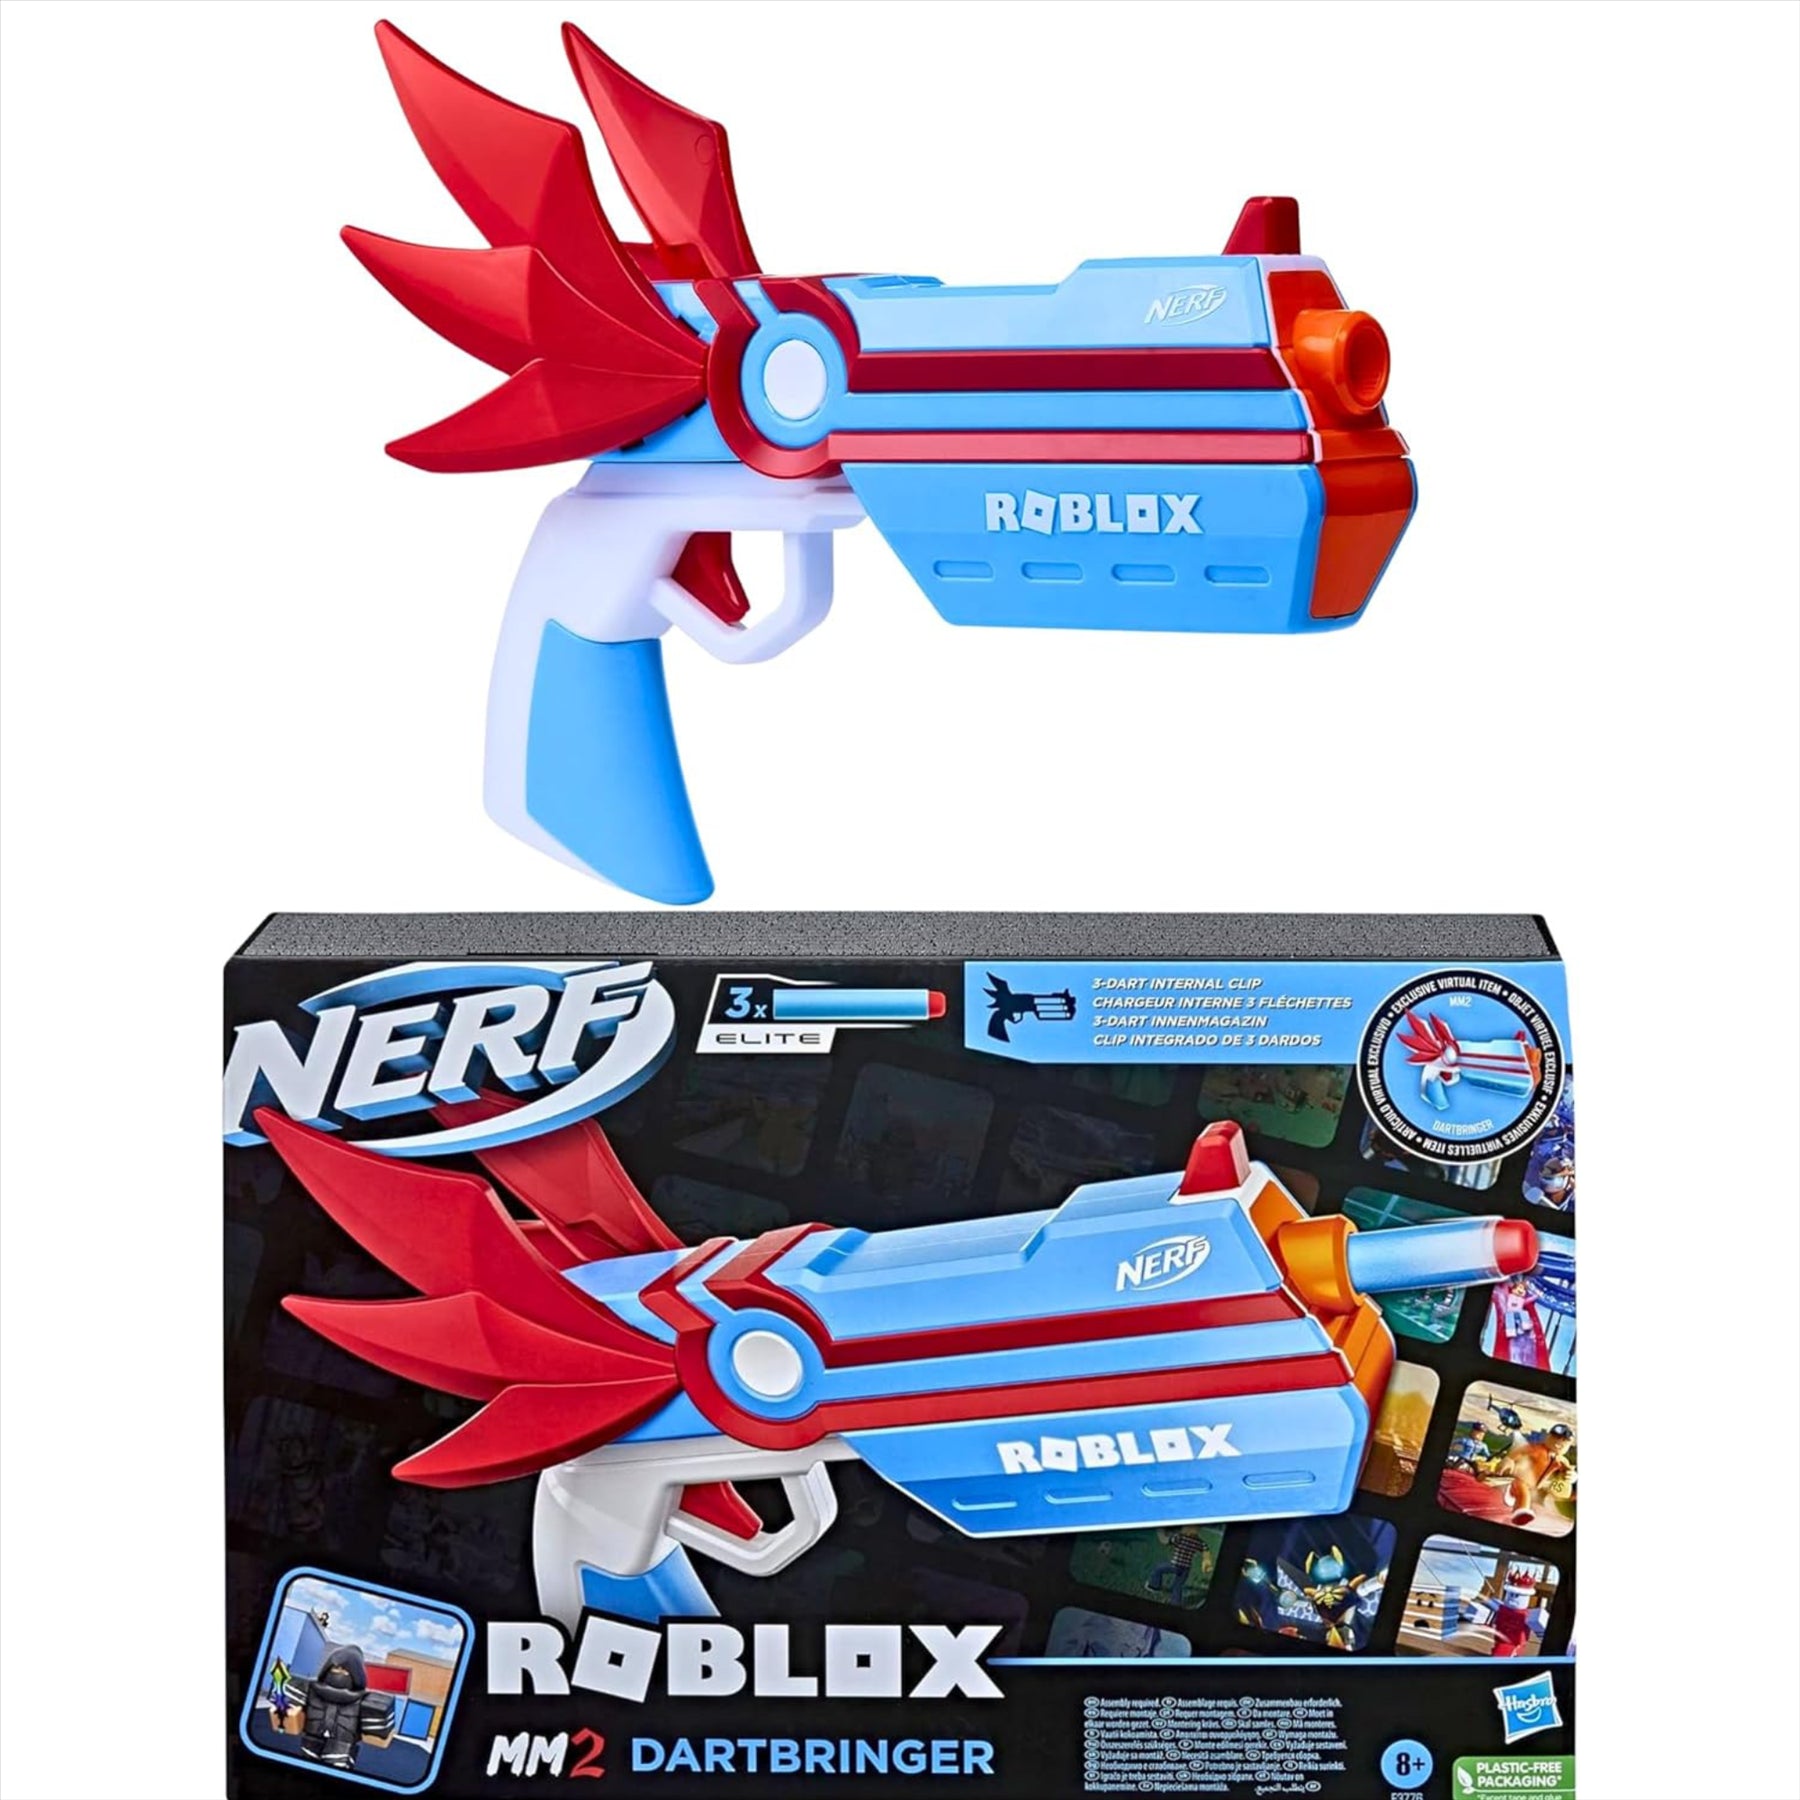 Ultimate Nerf Bundle - Roblox Dartbringer M2 Gun With Exclusive Code, Nerf Collectible Blind Bag Disk Launchers & Blaster Clip Charms Set - Gun and 3 Blind Bags - Toptoys2u